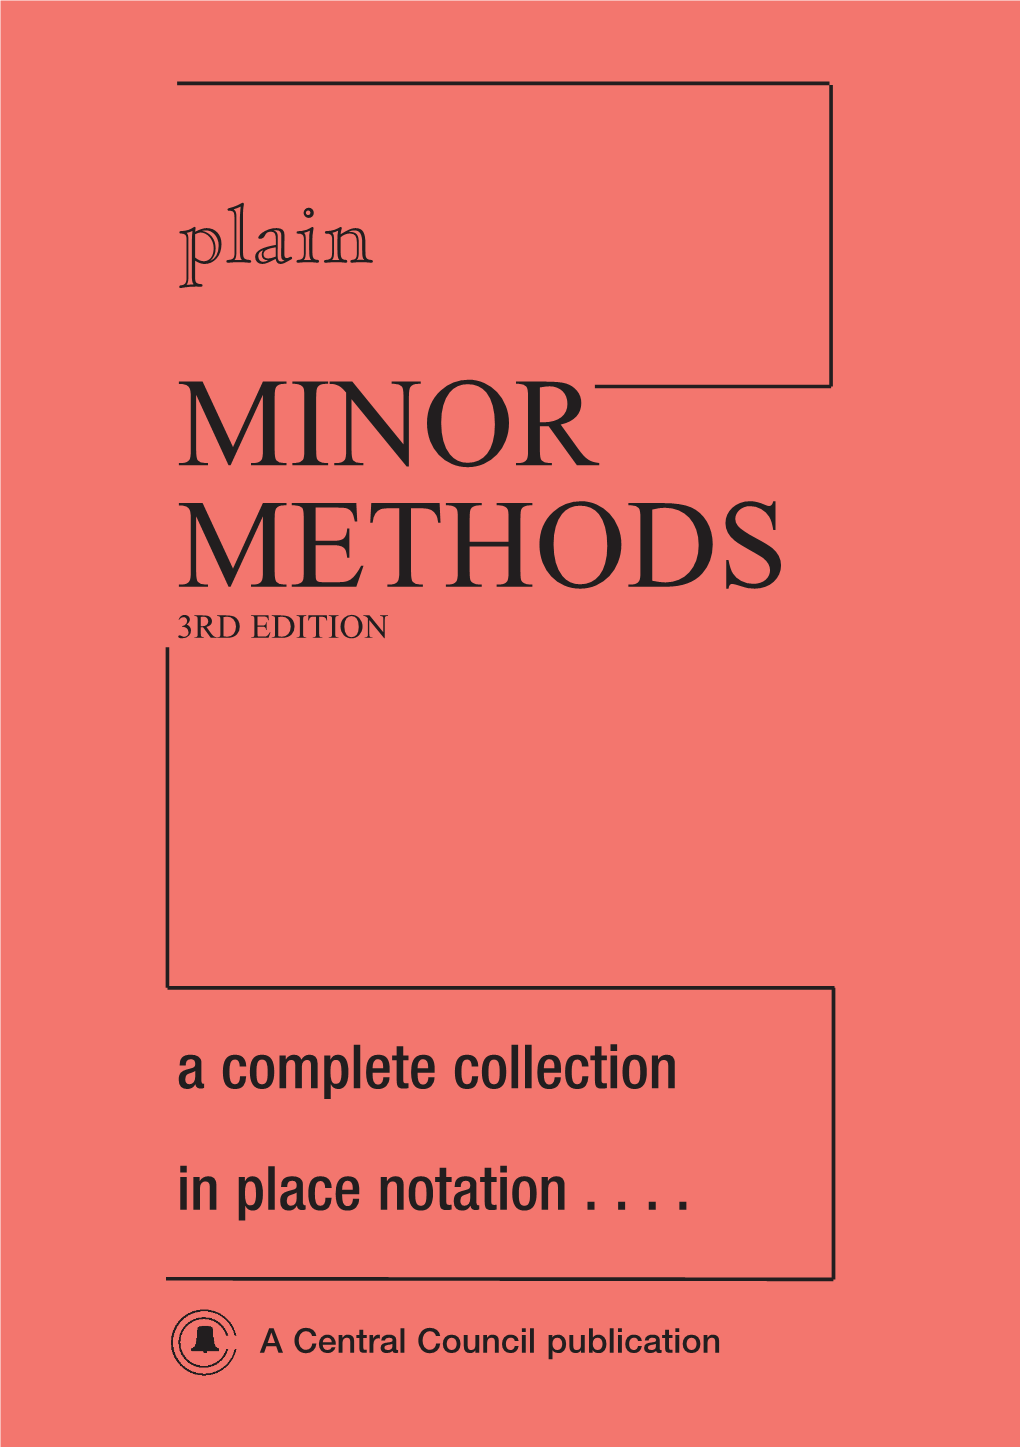 Plain MINOR METHODS 3RD EDITION Central Council of Church Bell Ringers 2008